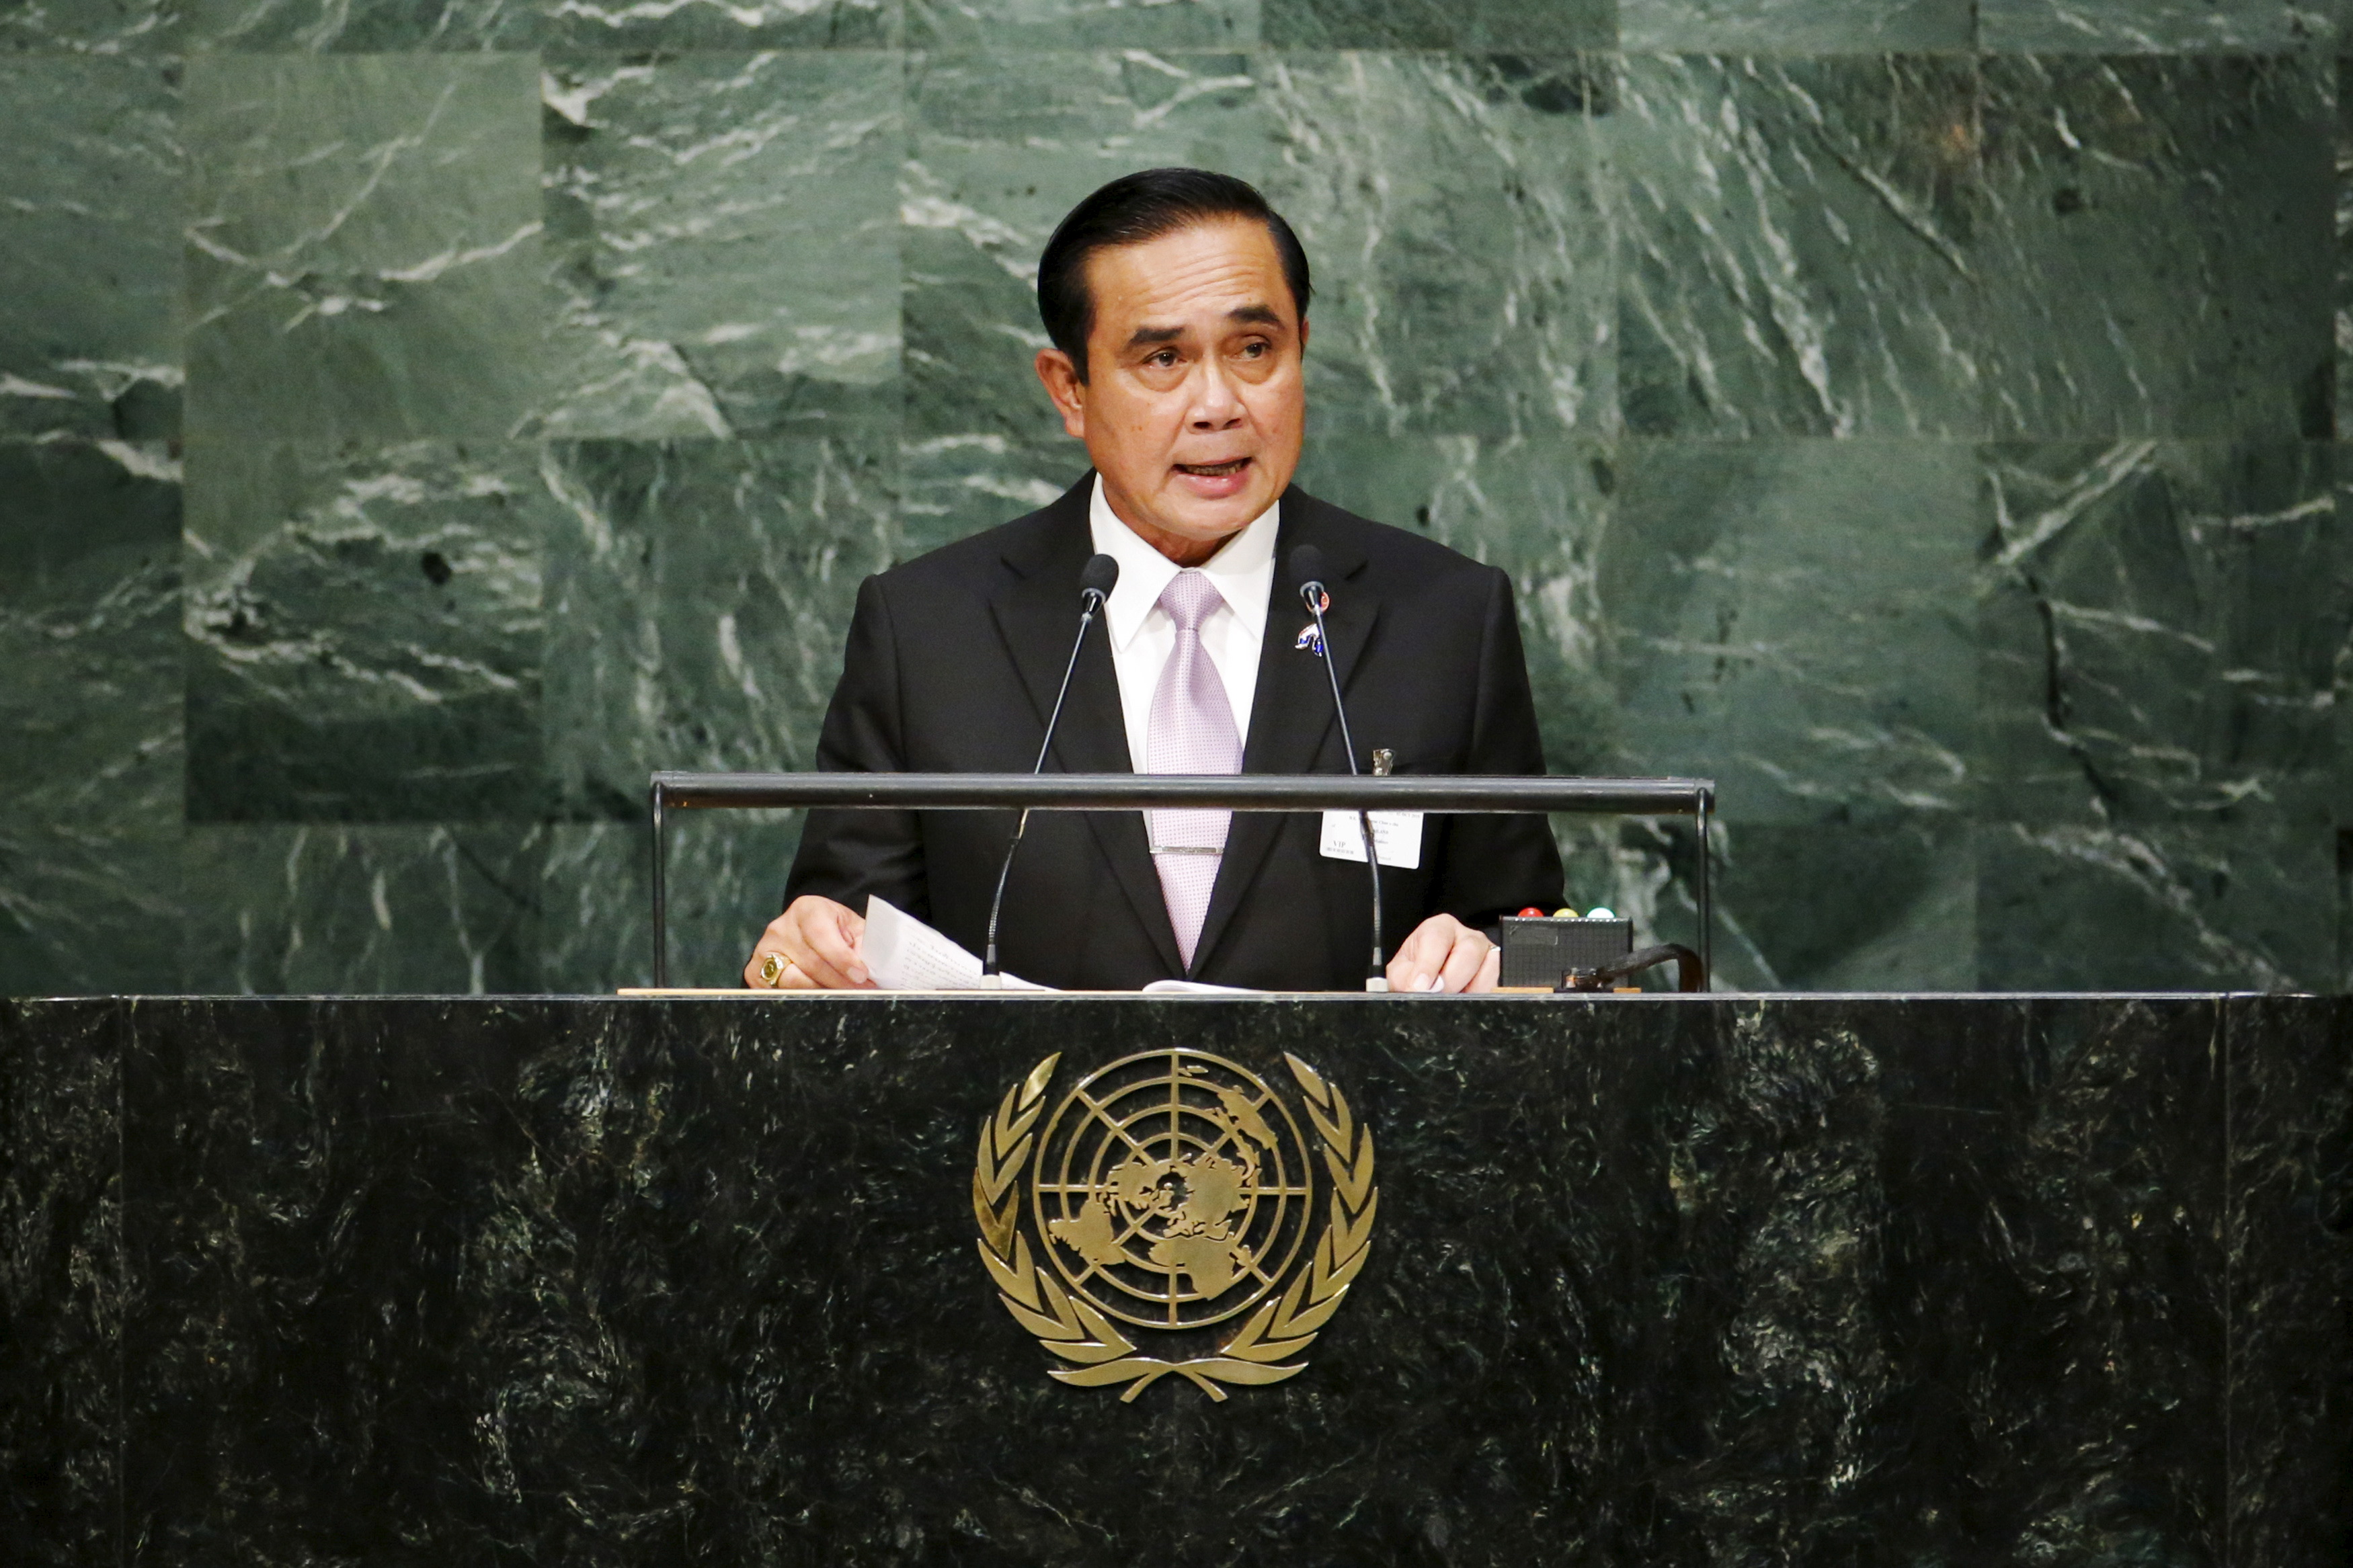 Thailand's Prime Minister Prayuth Chan-ocha speaks before attendees during the 70th session of the U.N. General Assembly in New York City on Sept. 29, 2015 (Eduardo Munoz—Reuters)